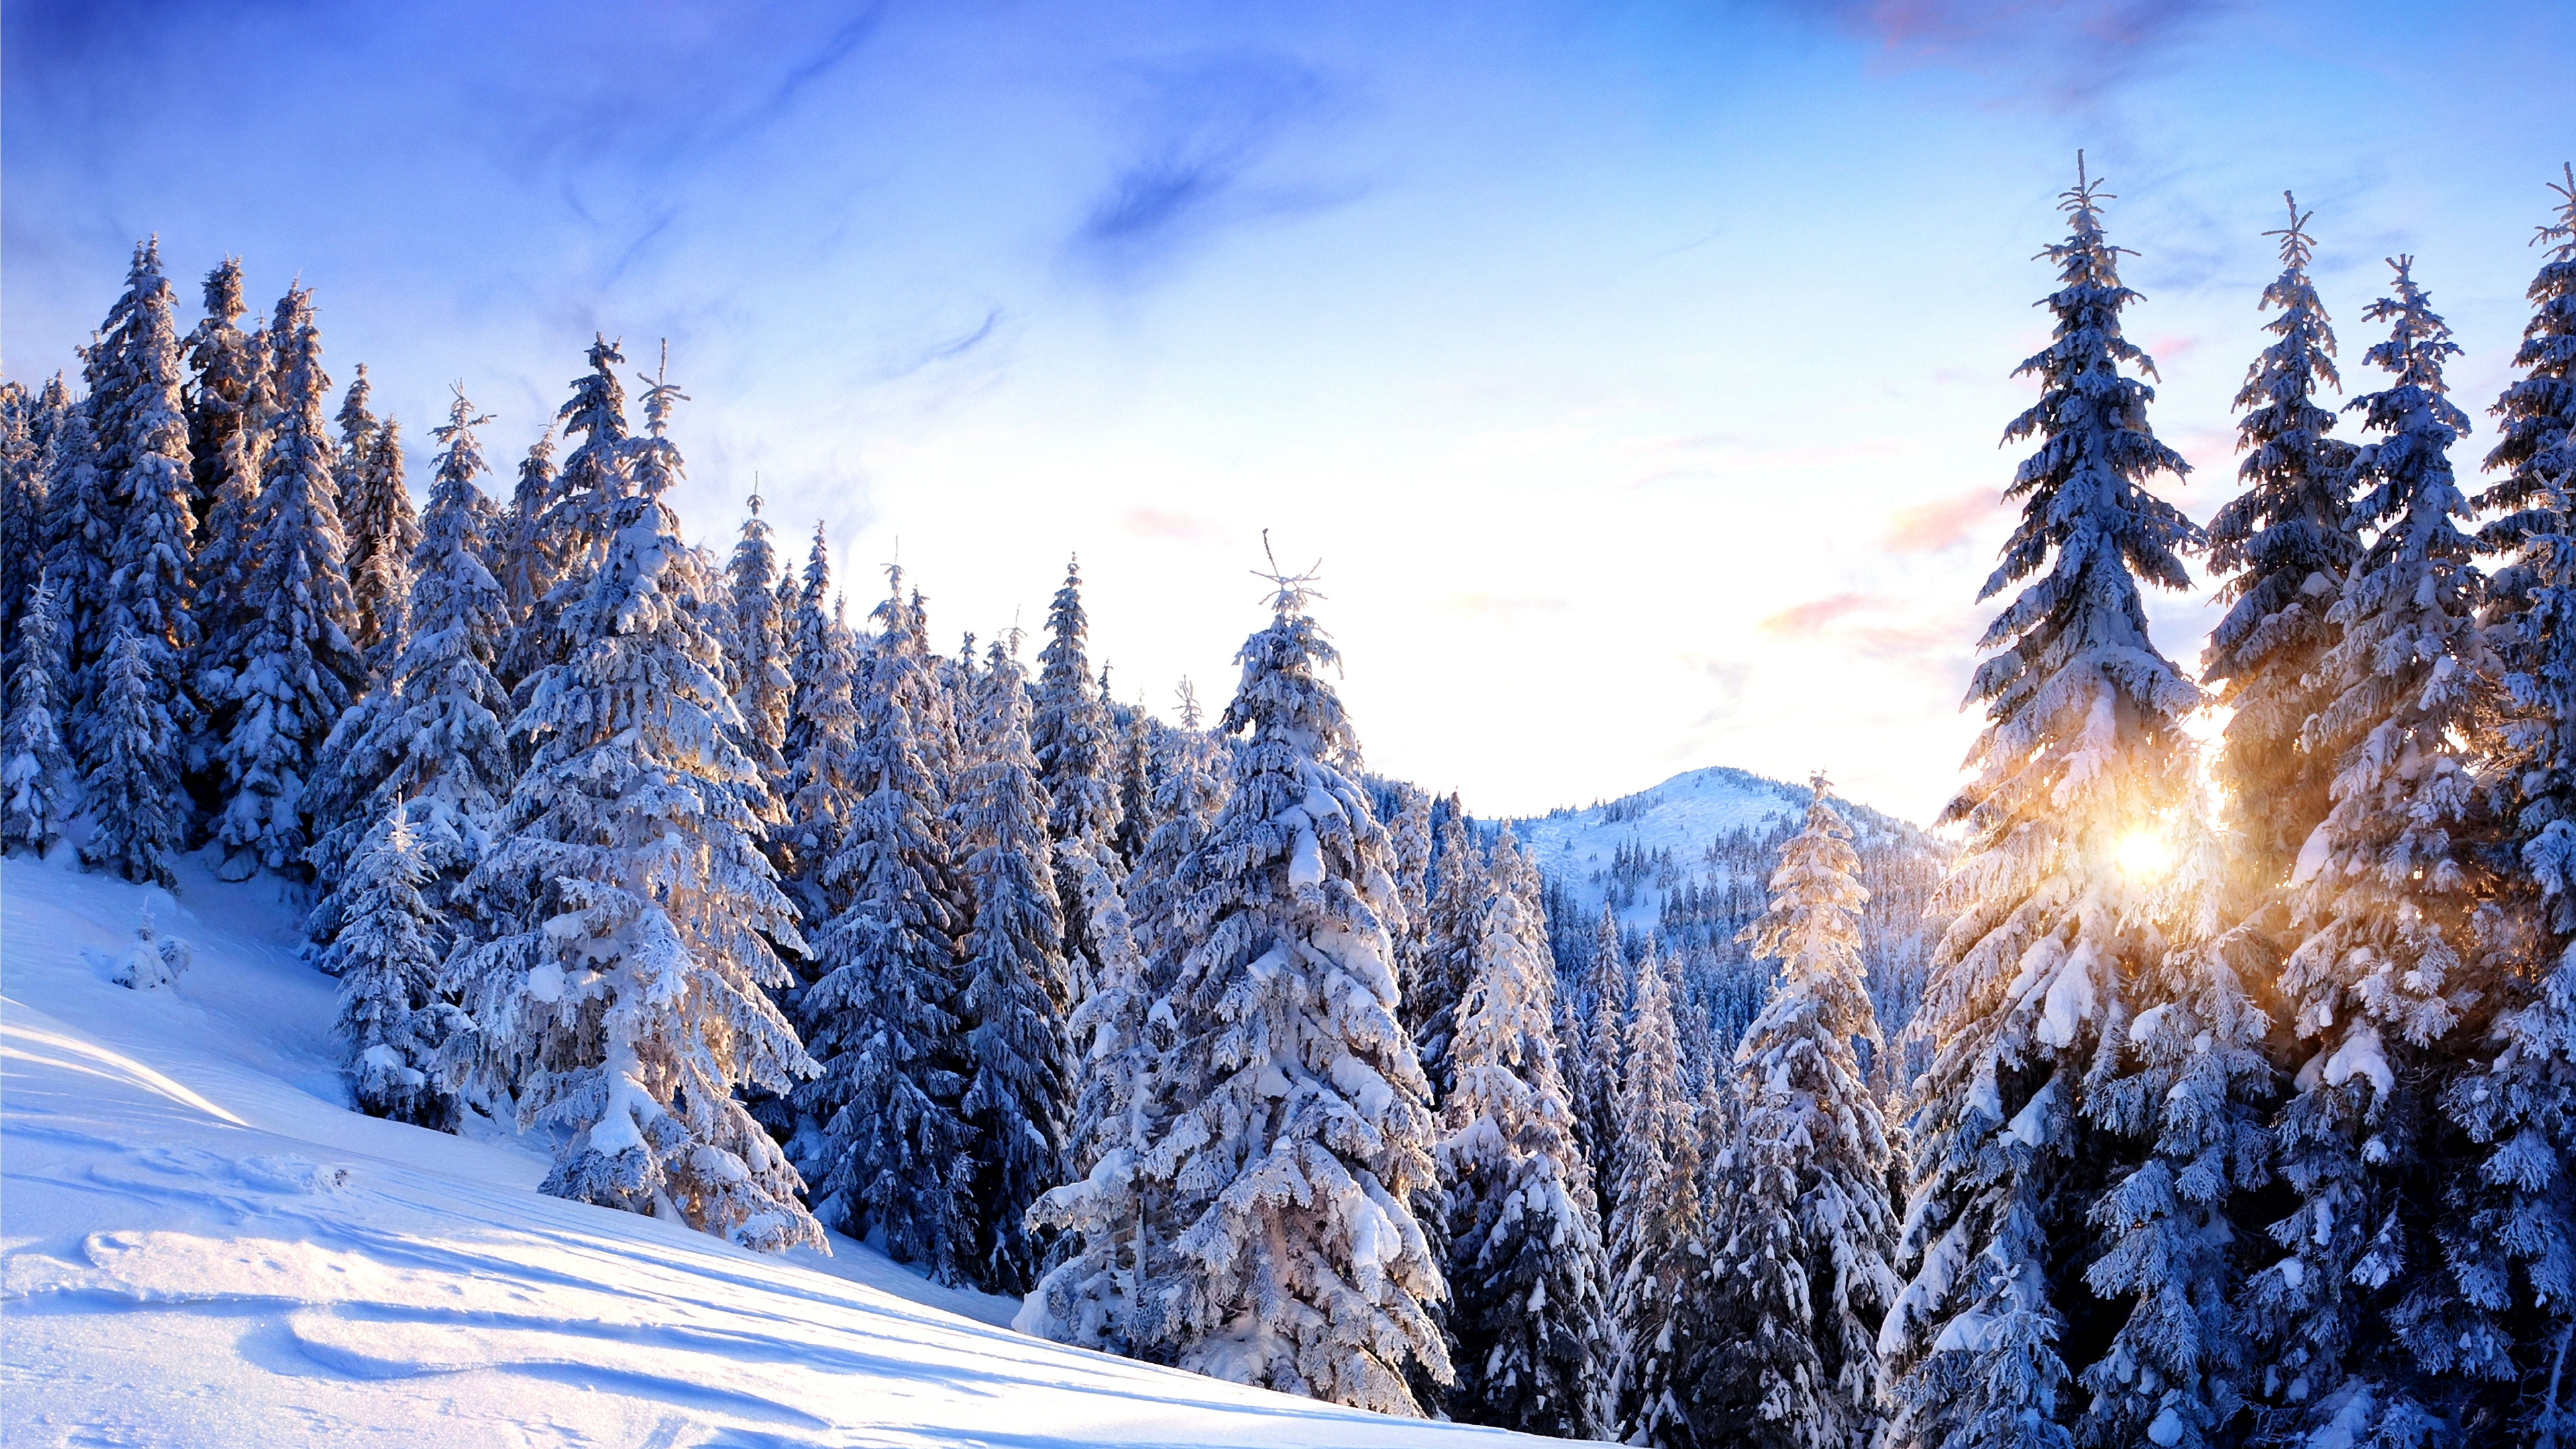 Snow Covered Pine Trees and Mountains During Daytime. Wallpaper in 3840x2160 Resolution